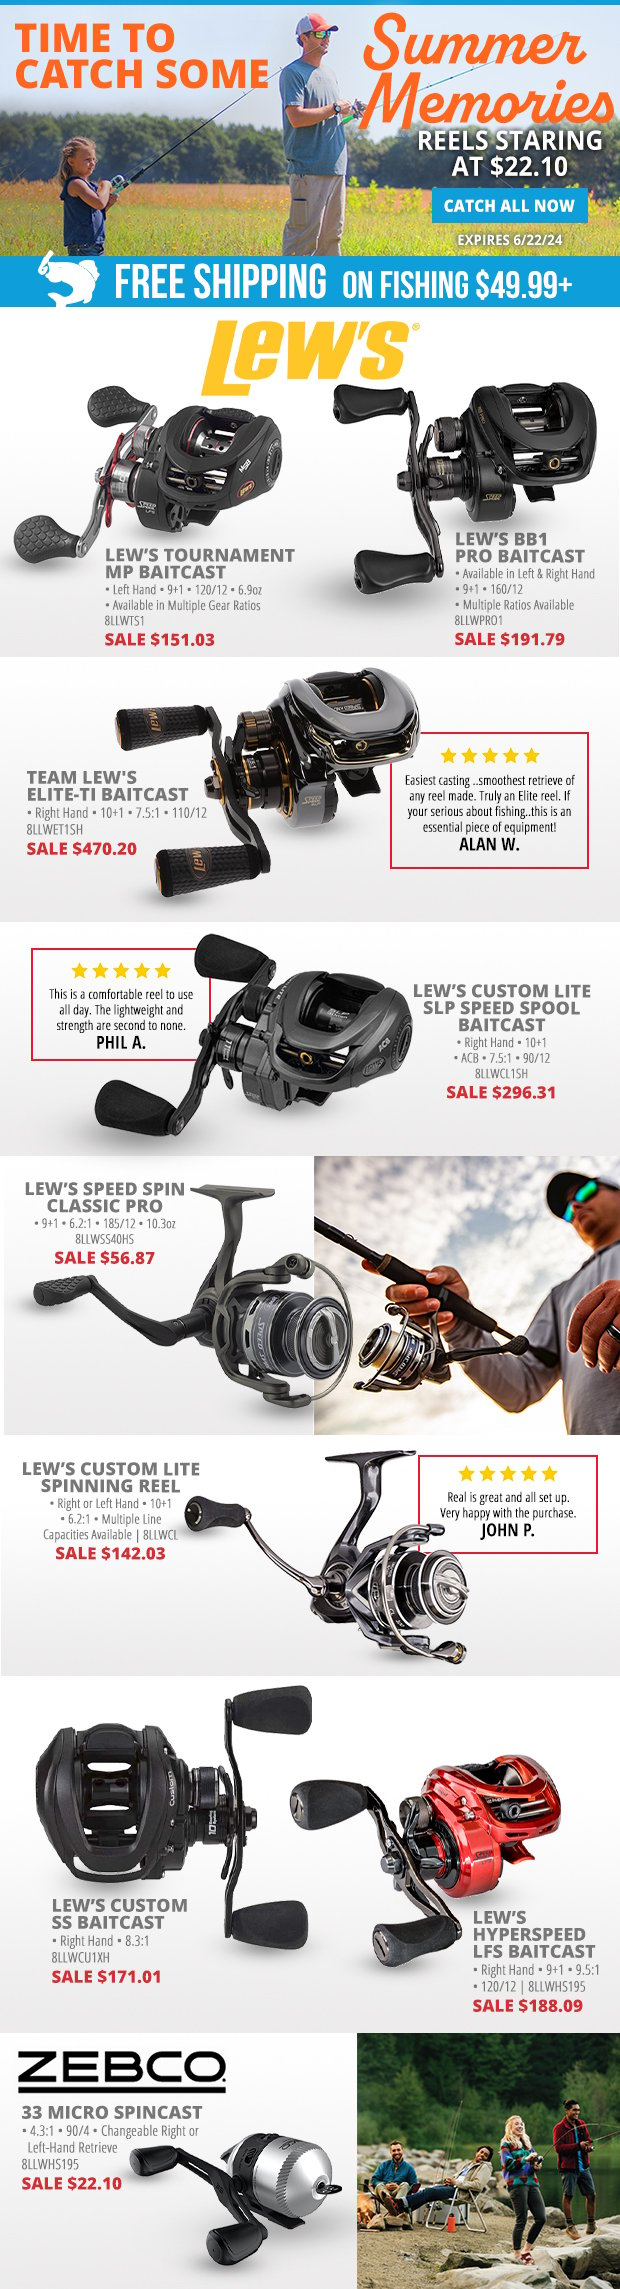 Time to Catch Some Summer Memories with Reels Starting at $22.10